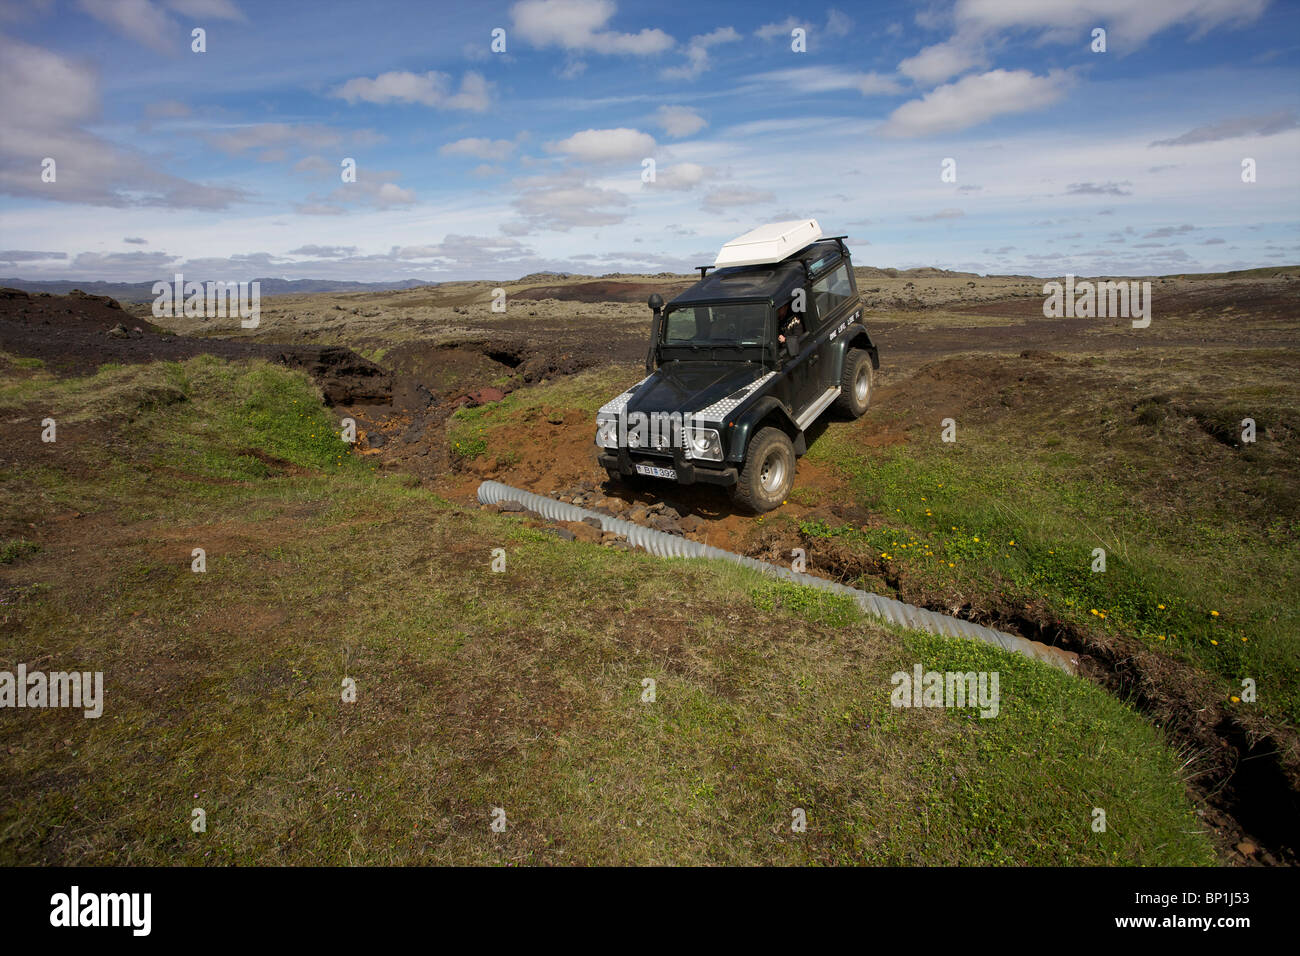 Land Rover Defender TDI goes across a washed out road in the highlands of Iceland near Laki Craters. Vatnajokull National Park Stock Photo